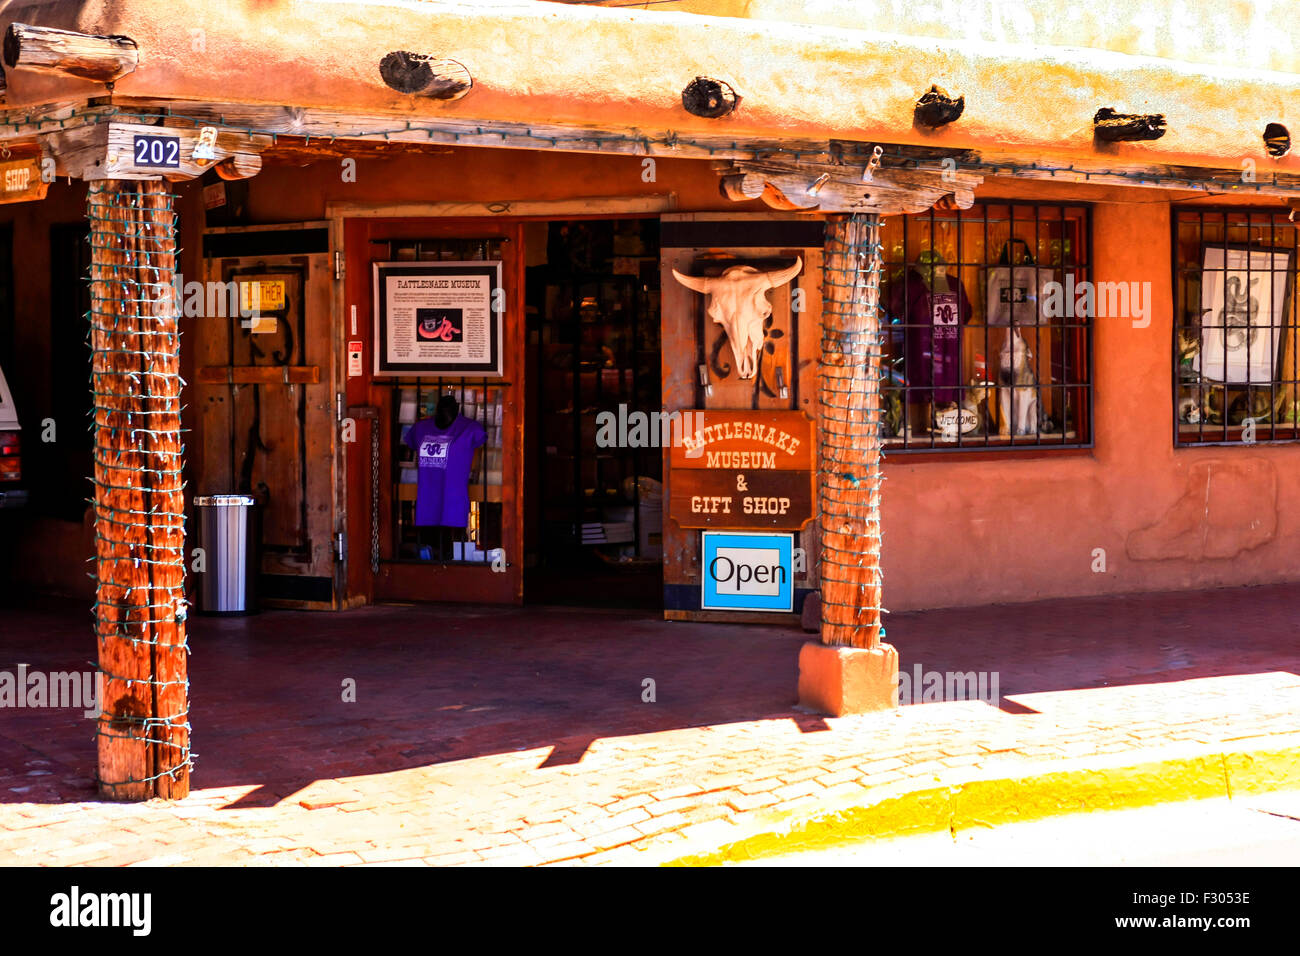 The Rattle Snake Museum and Gift shop on San Felipe Street in Old Town Albuquerque in New Mexico Stock Photo